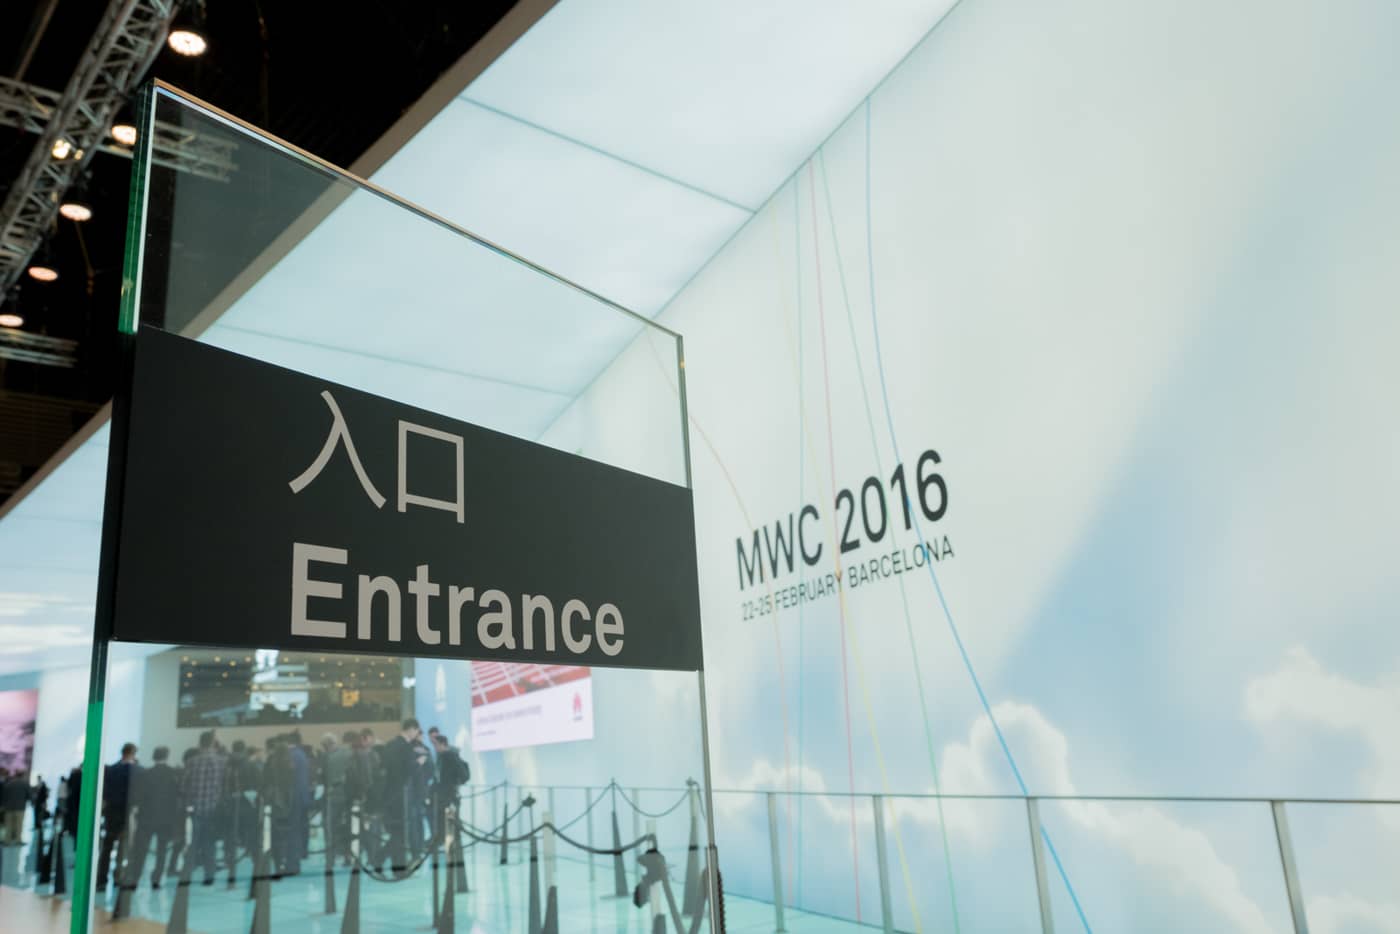 Entrance to the Mobile World Congress event